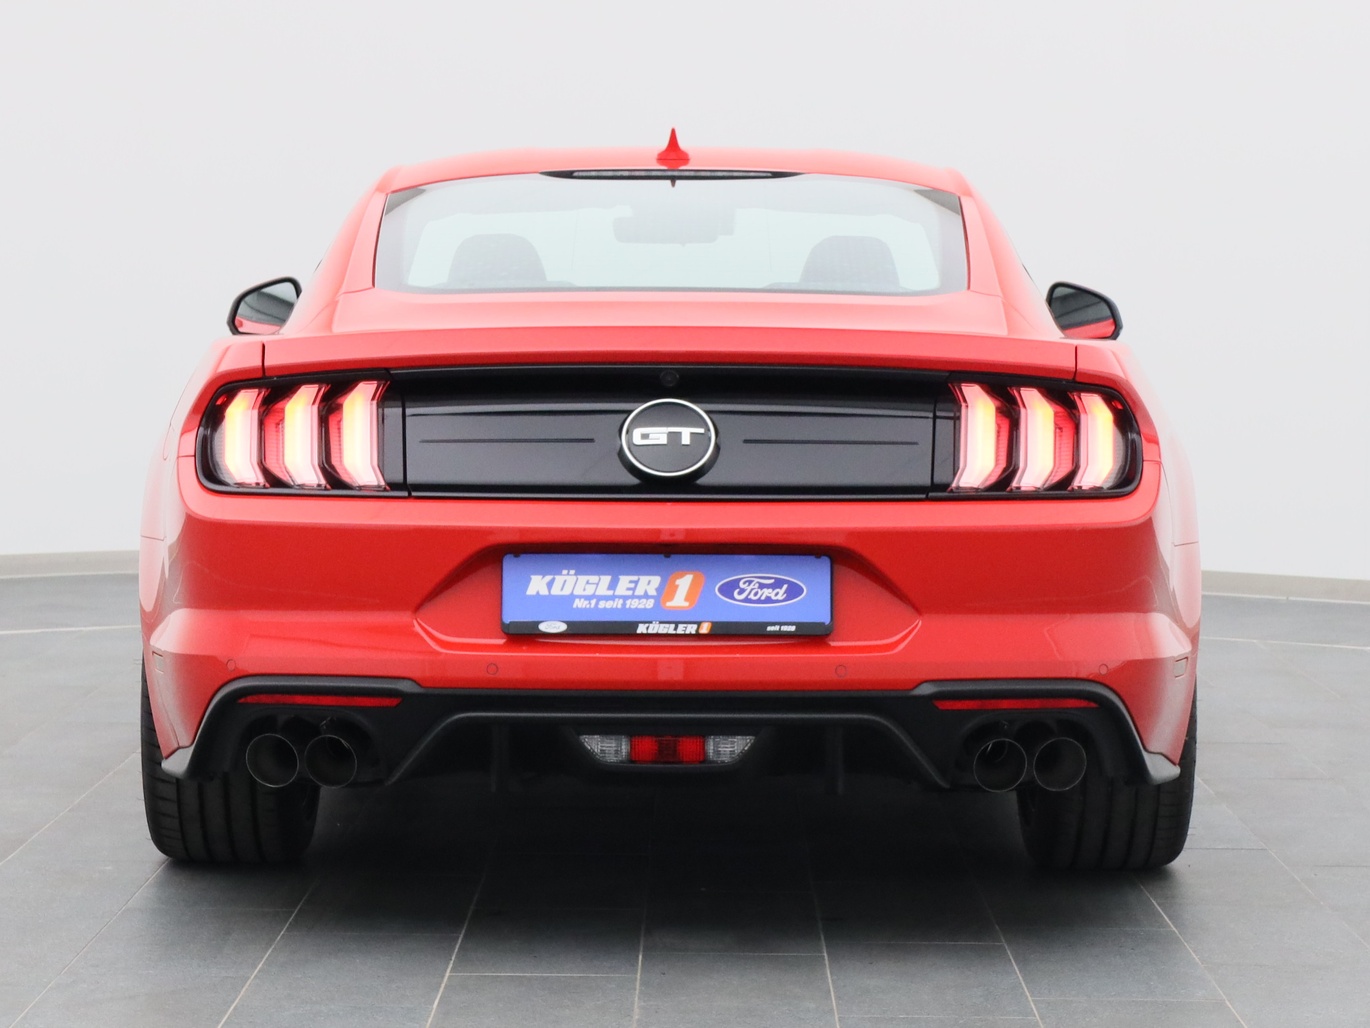 Heckansicht eines Ford Mustang GT Coupé V8 450PS / Premium 2 in Race-rot 